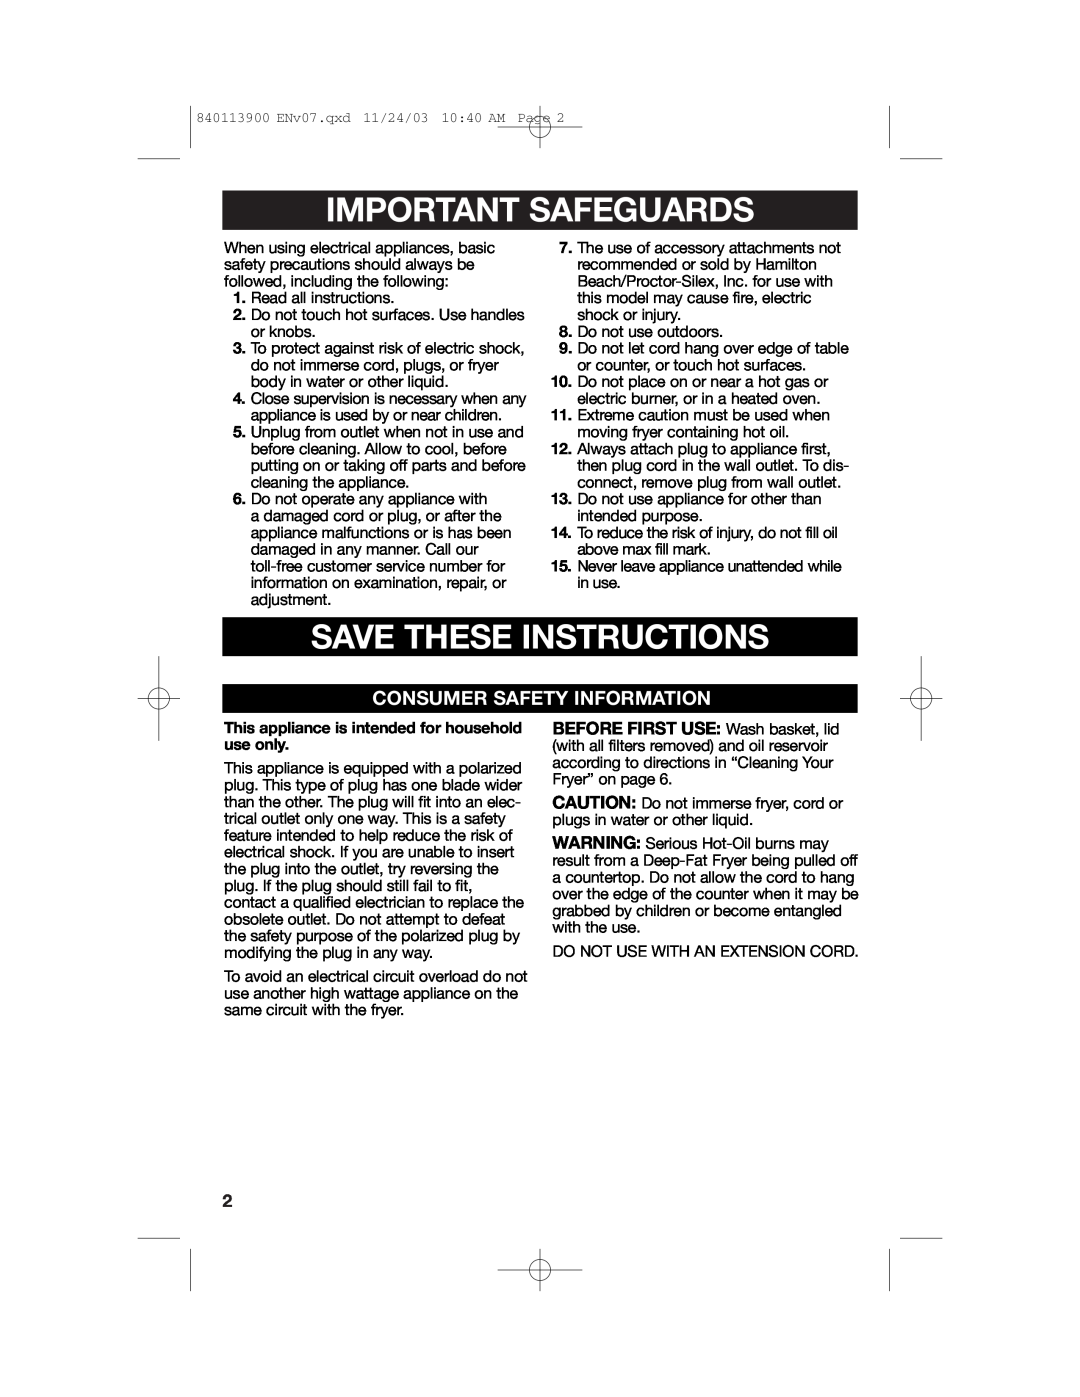 Hamilton Beach 35015 manual Important Safeguards, Save These Instructions, Consumer Safety Information 